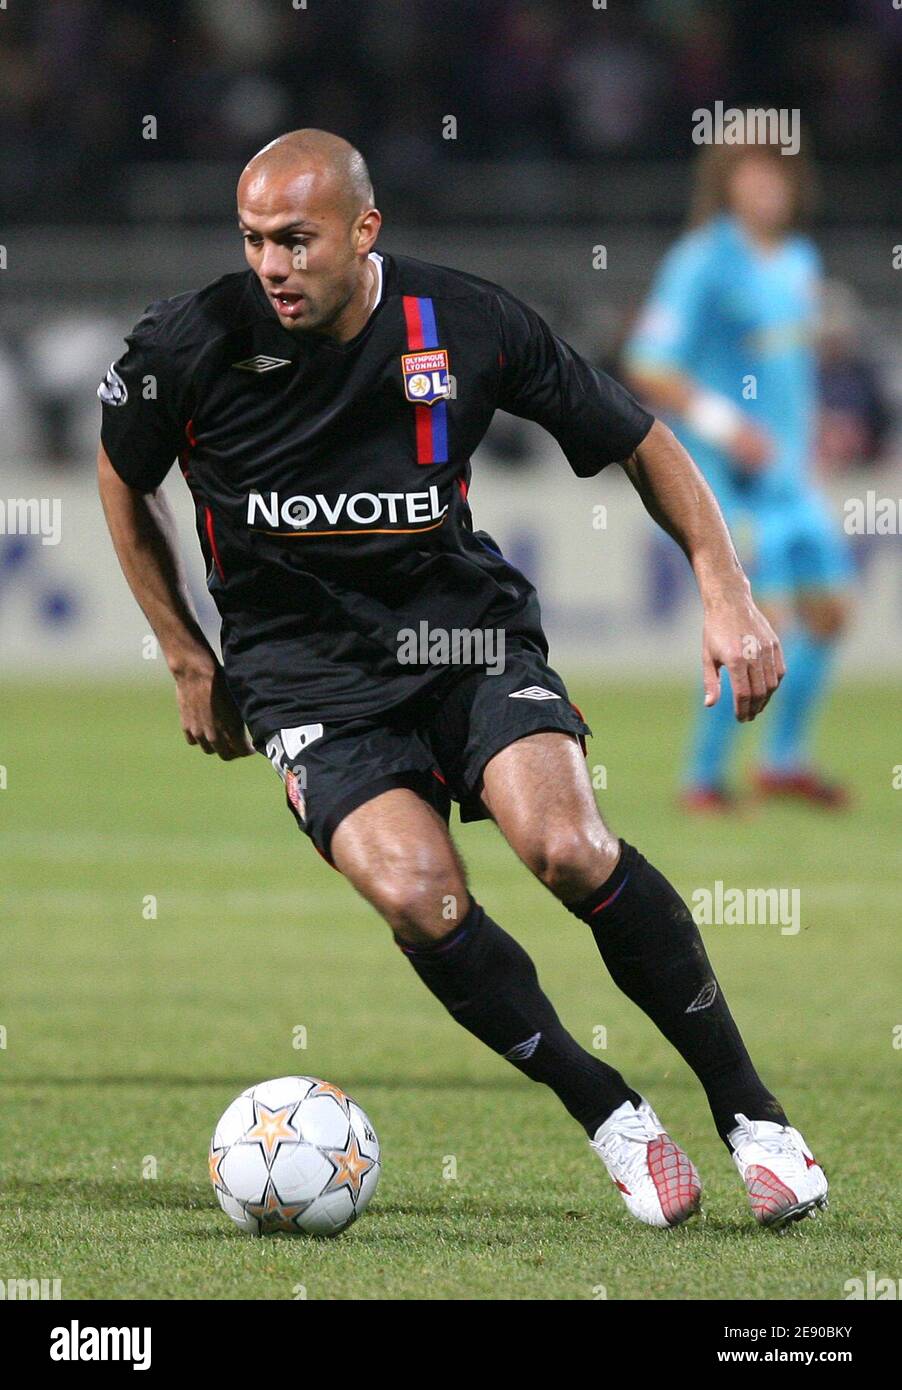 Lyon's Fabio Santos during the UEFA Champions League, Group E, Olympique Lyonnais vs FC Barcelona at the 'Stade de Gerland' in Lyon, France, on November 27, 2007. The match ended in a draw 2-2. Photo by Gouhier-Taamallah/Cameleon/ABACAPRESS.COM Stock Photo